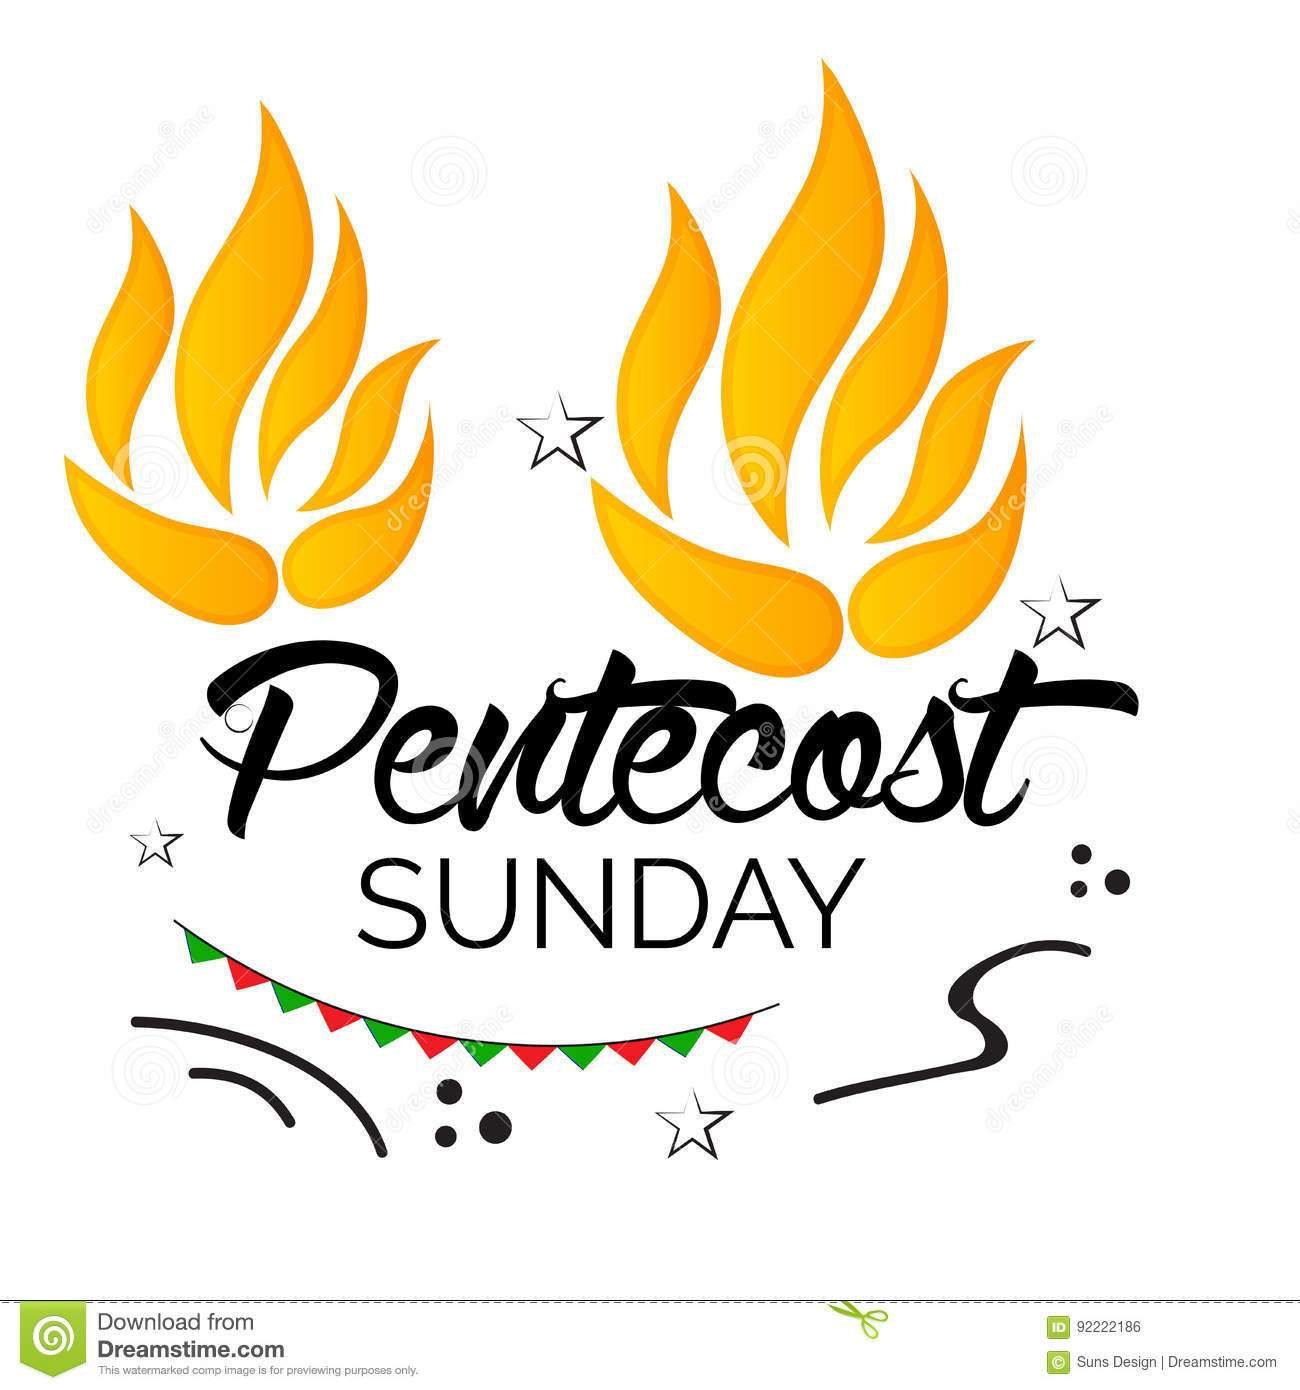 Pentecost clipart free clipart images gallery for free